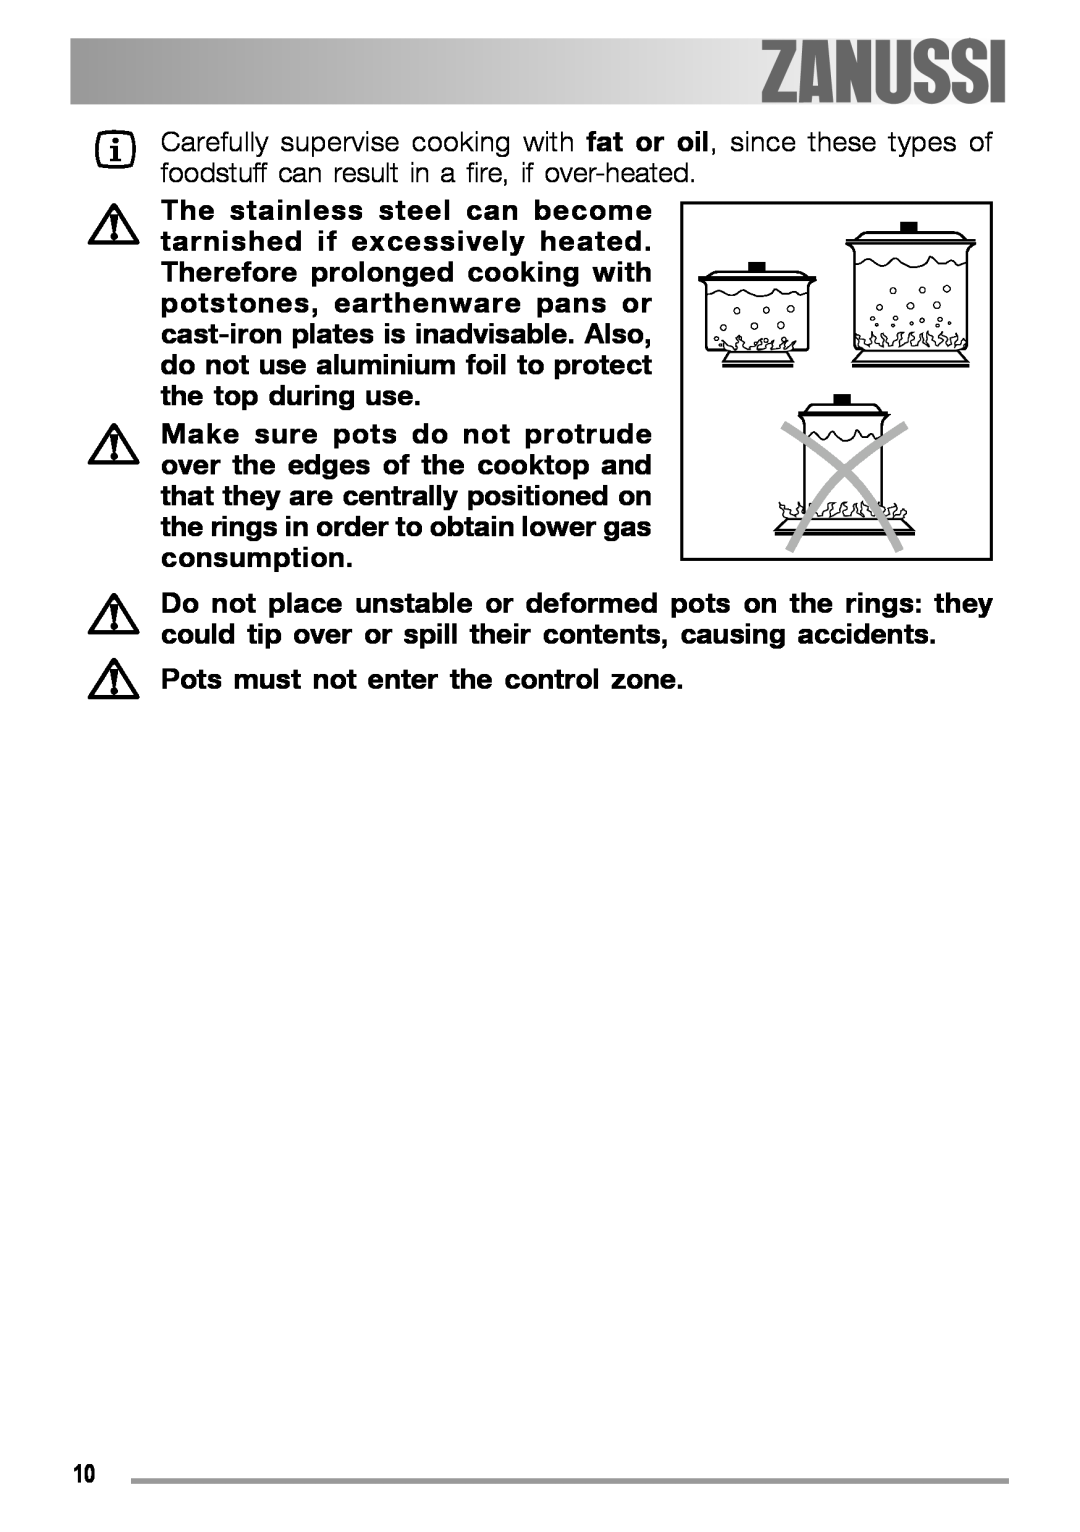 Zanussi ZGF 780 IT manual Pots must not enter the control zone 